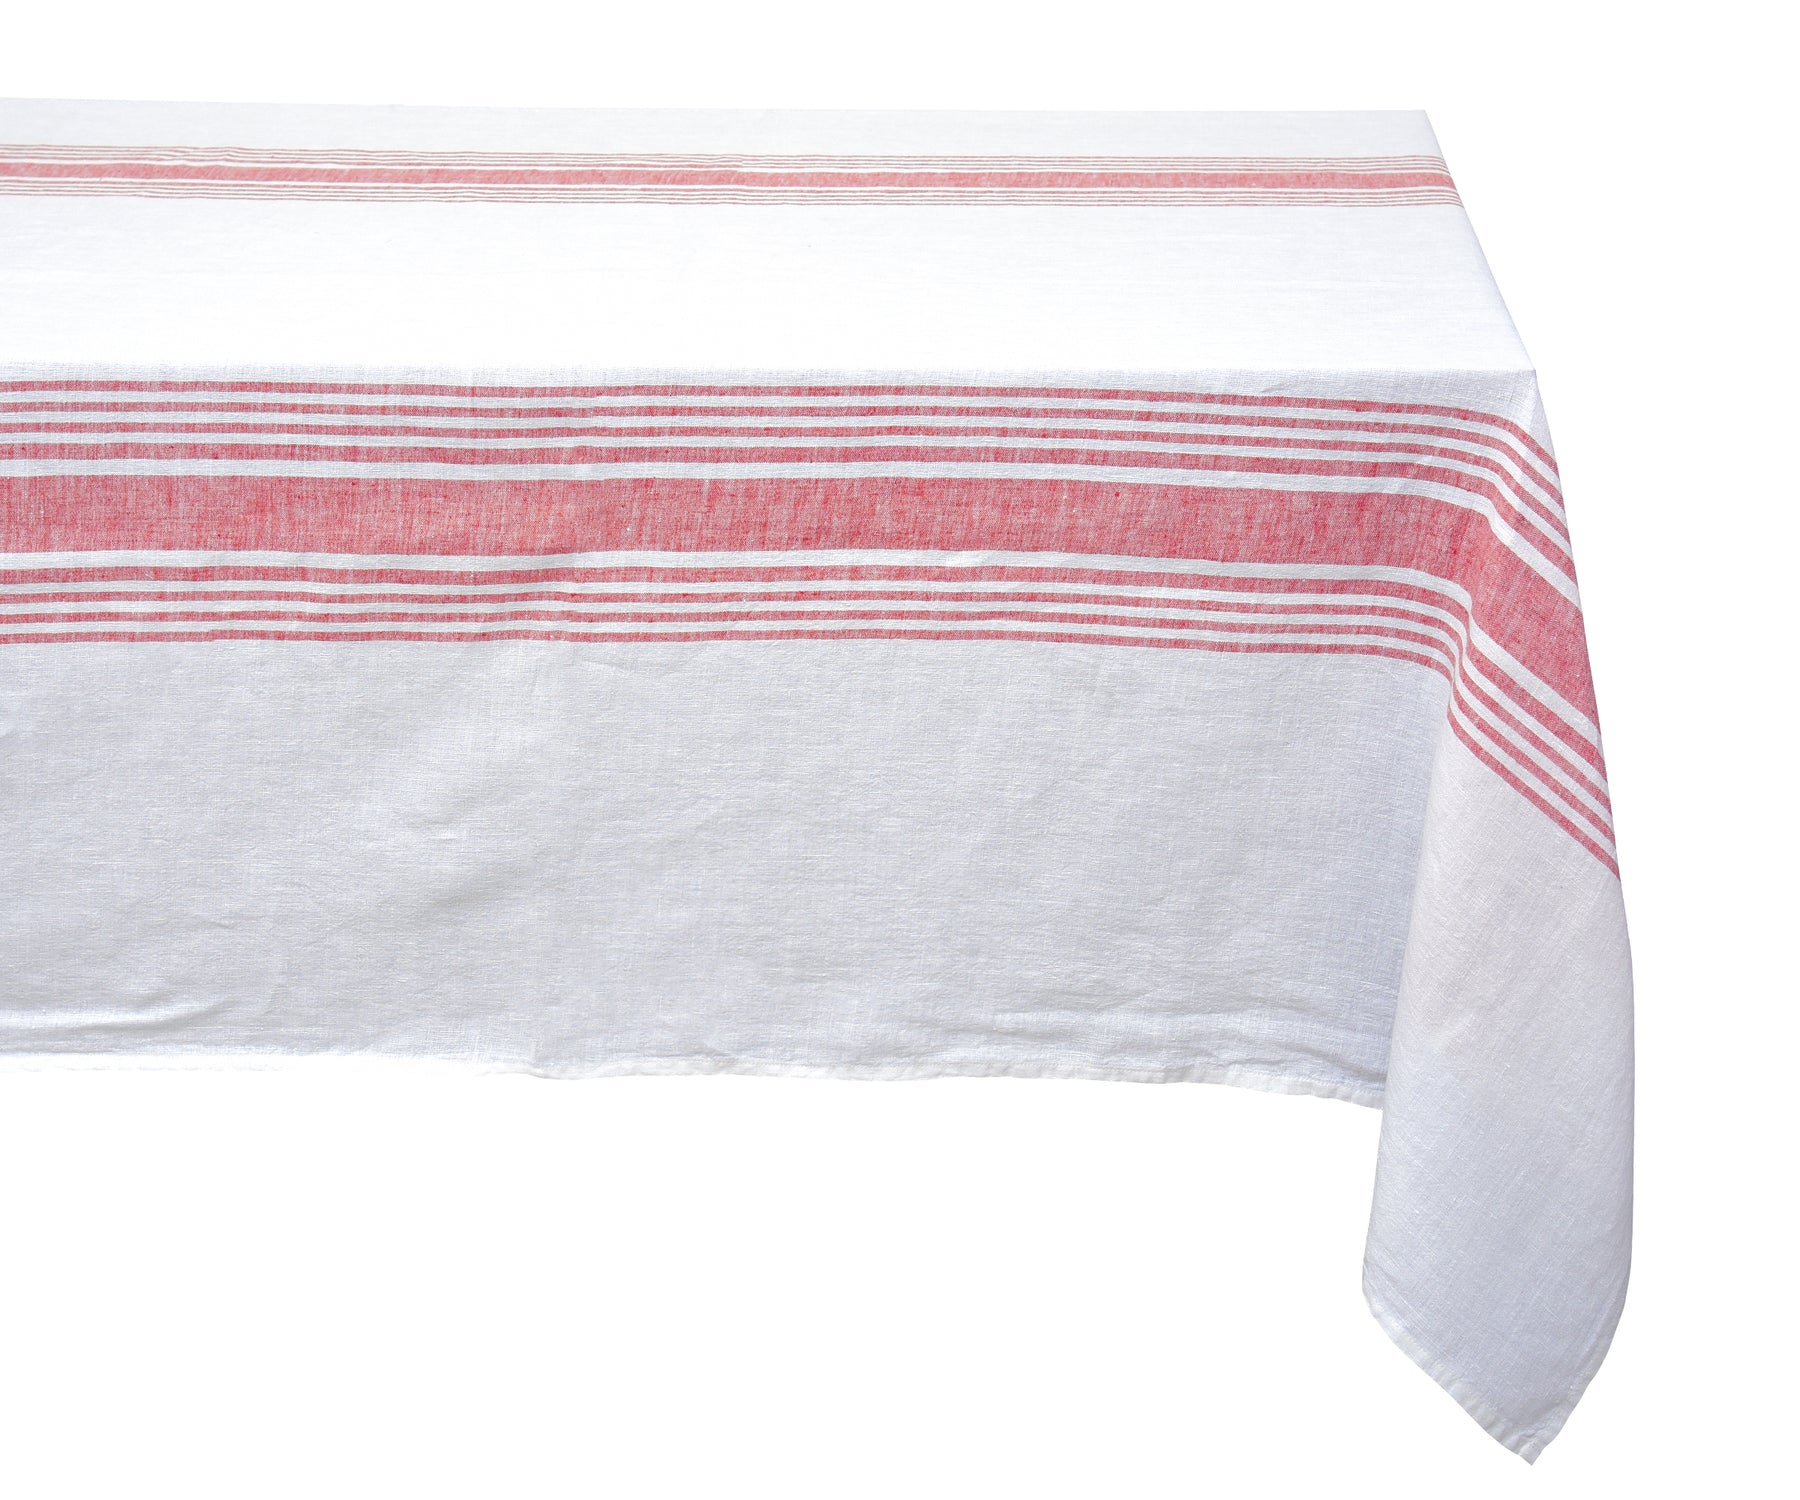 White linen tablecloth with a red and white striped motif